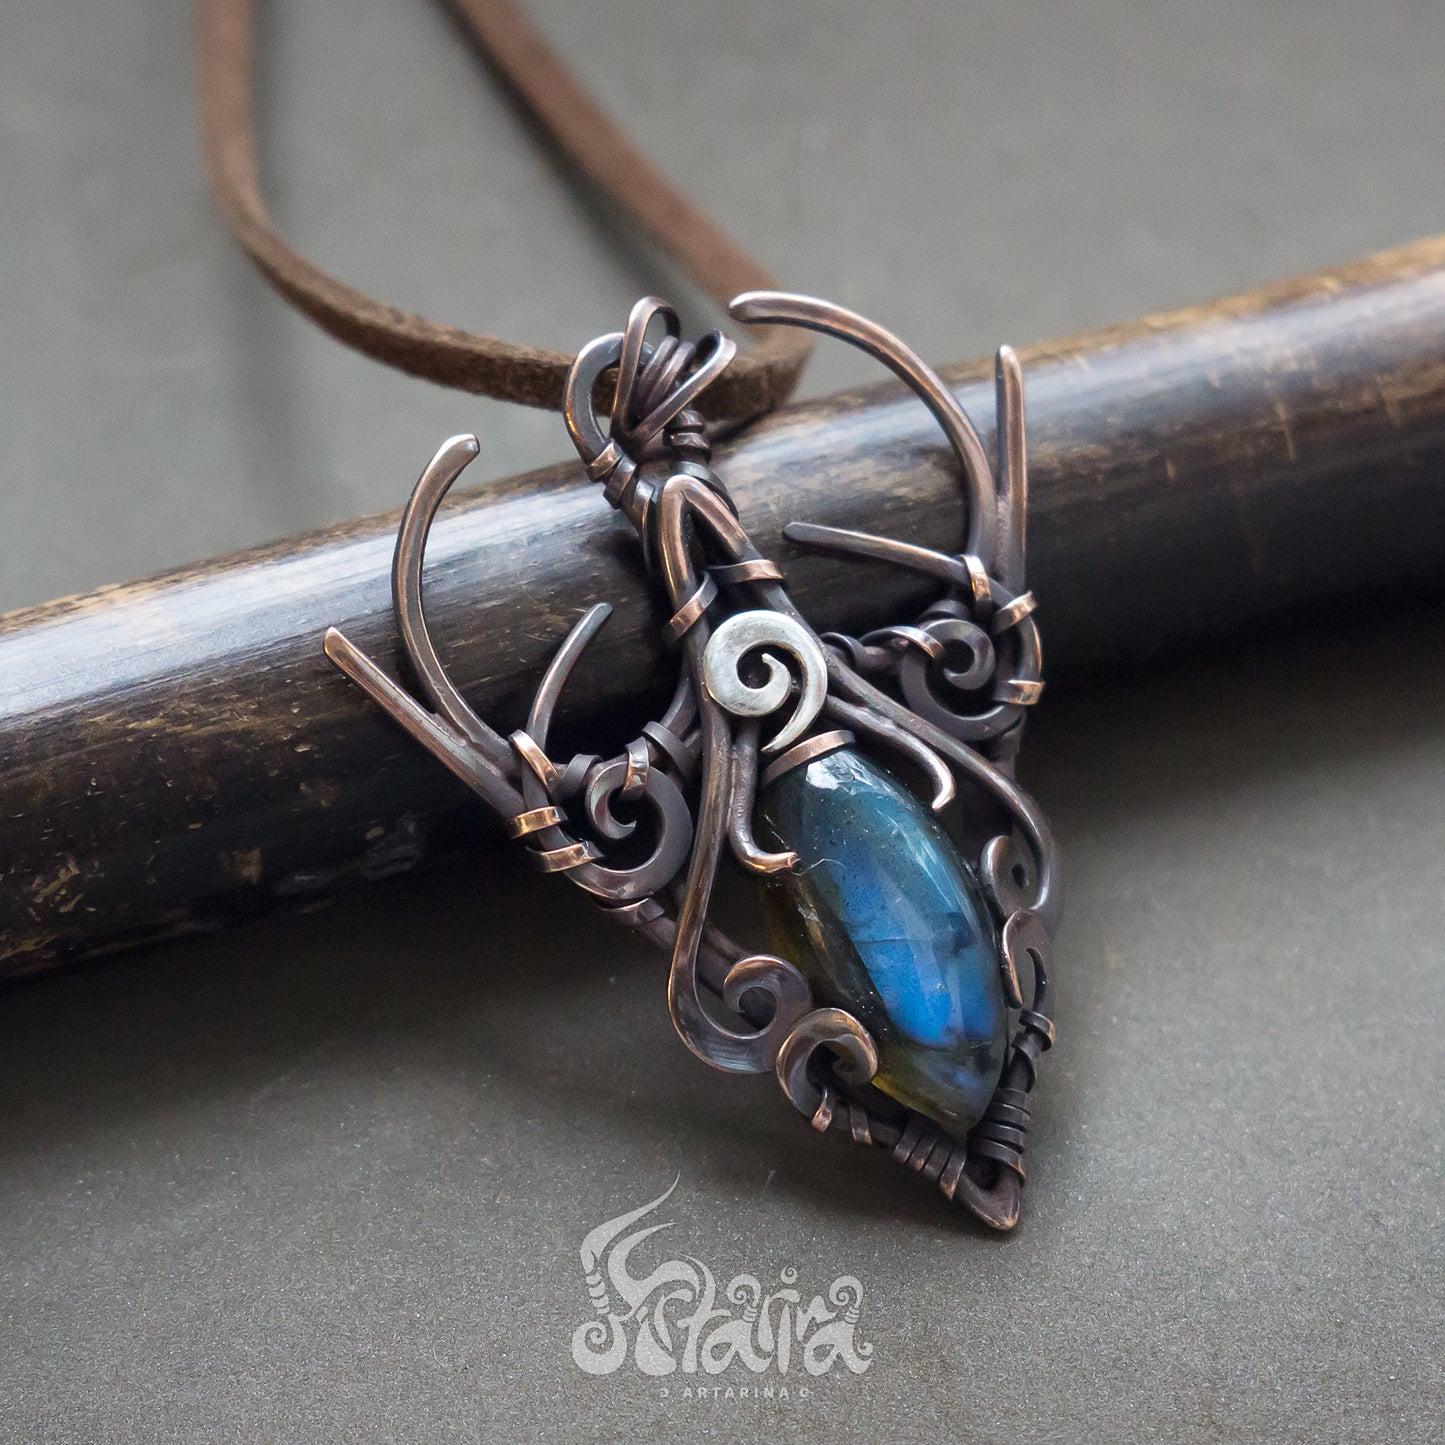 his unique and one of a kind fairy elven necklace was made in wire wrap technique from pure copper and natural light blue amazonite. This gothic elven dainty crescent moon lunula elven talisman jewelry necklace pendant 